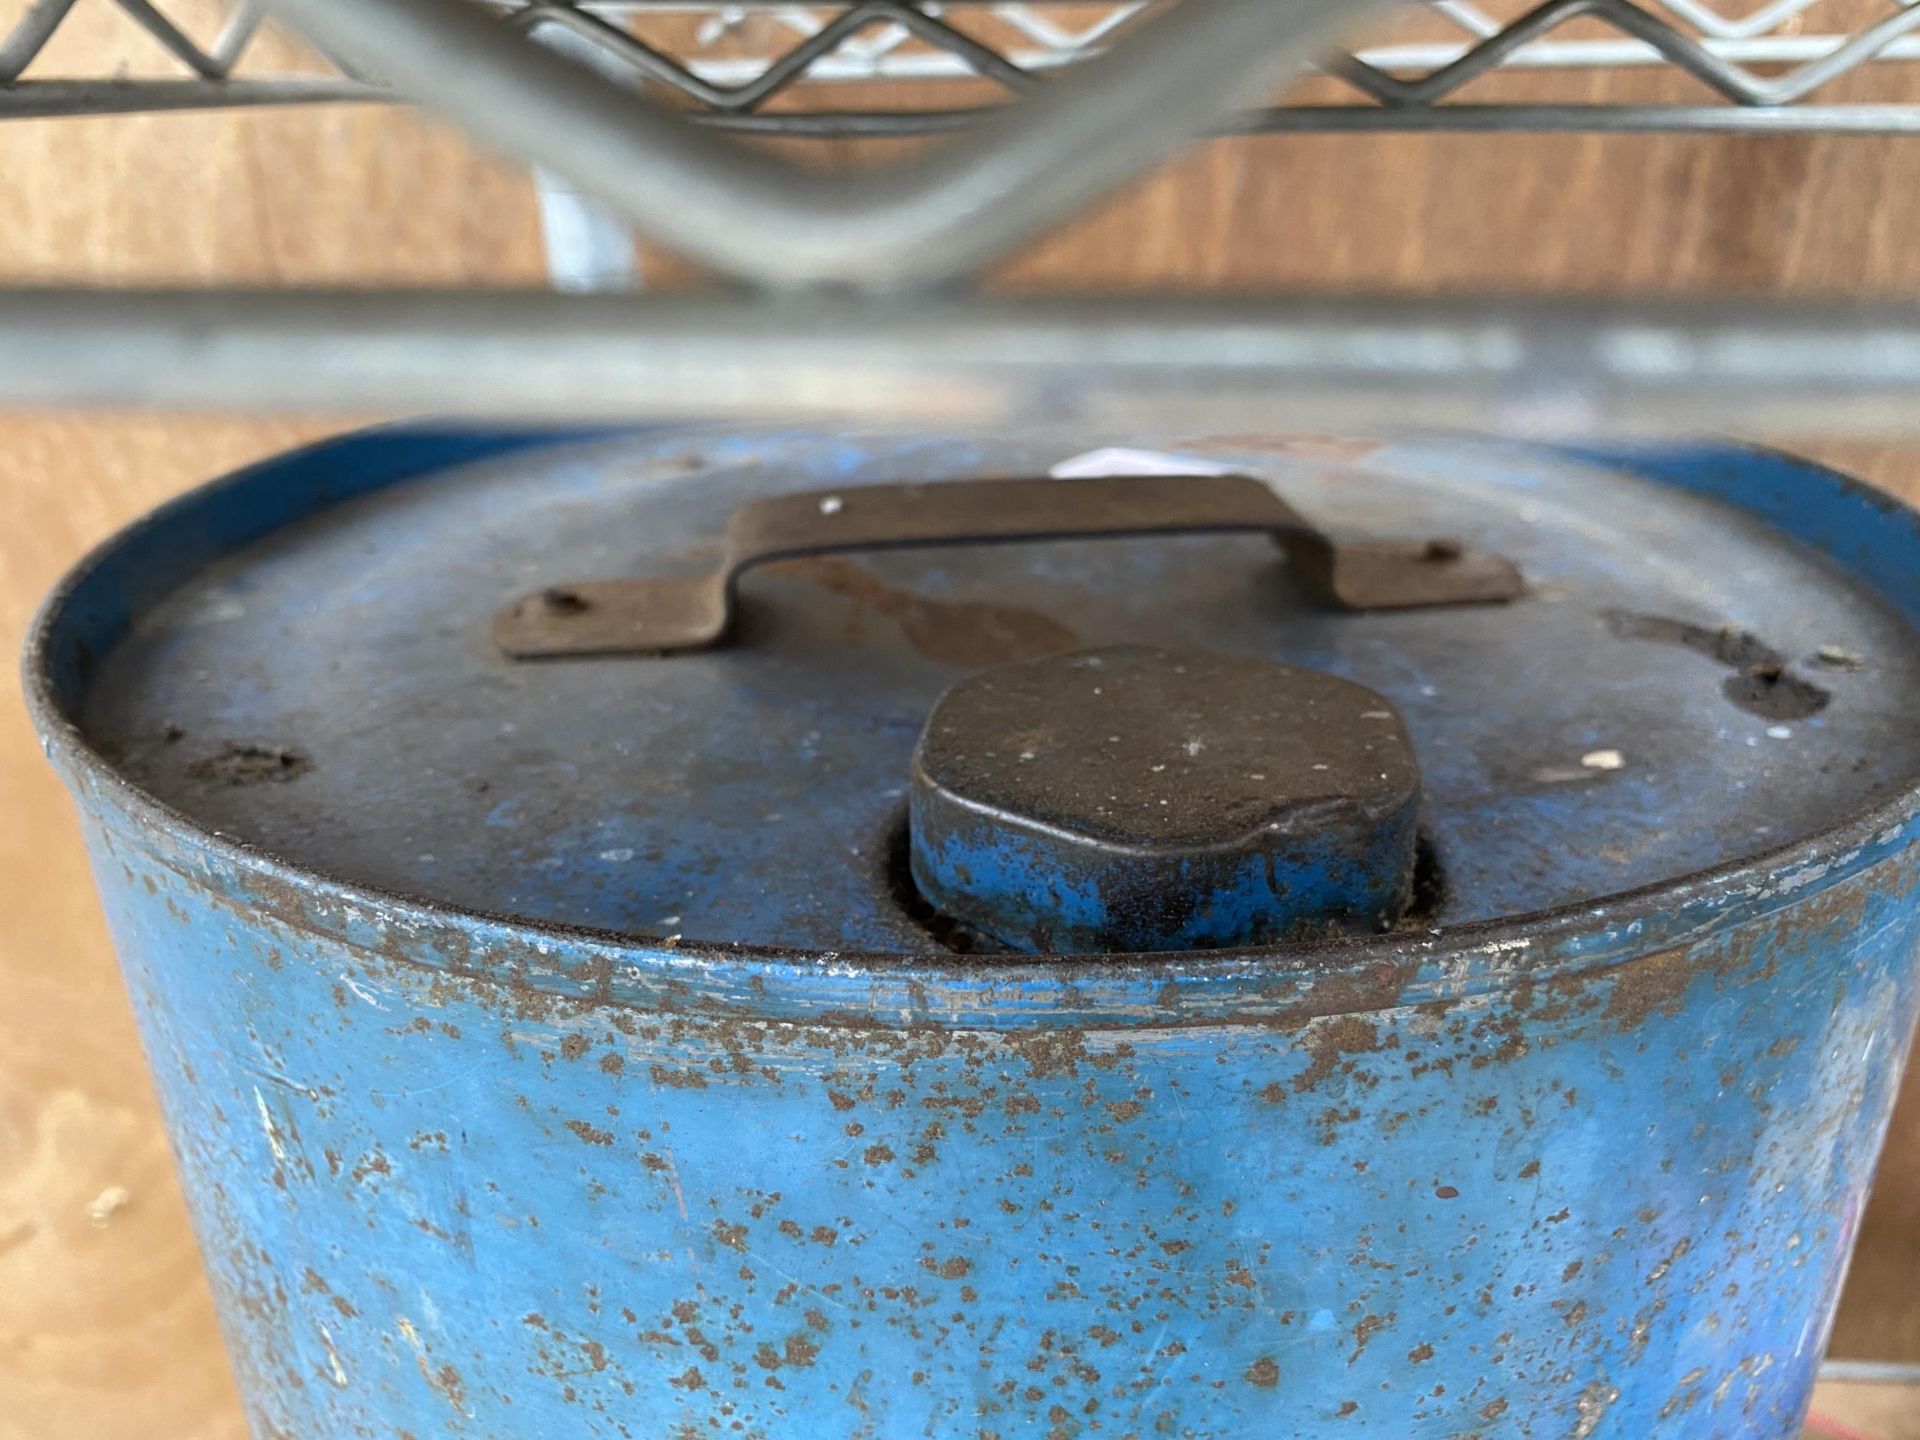 A VINTAGE VALOR ESSO BLUE PARAFIN 5 GALLON DRUM WITH TAP - Image 4 of 4